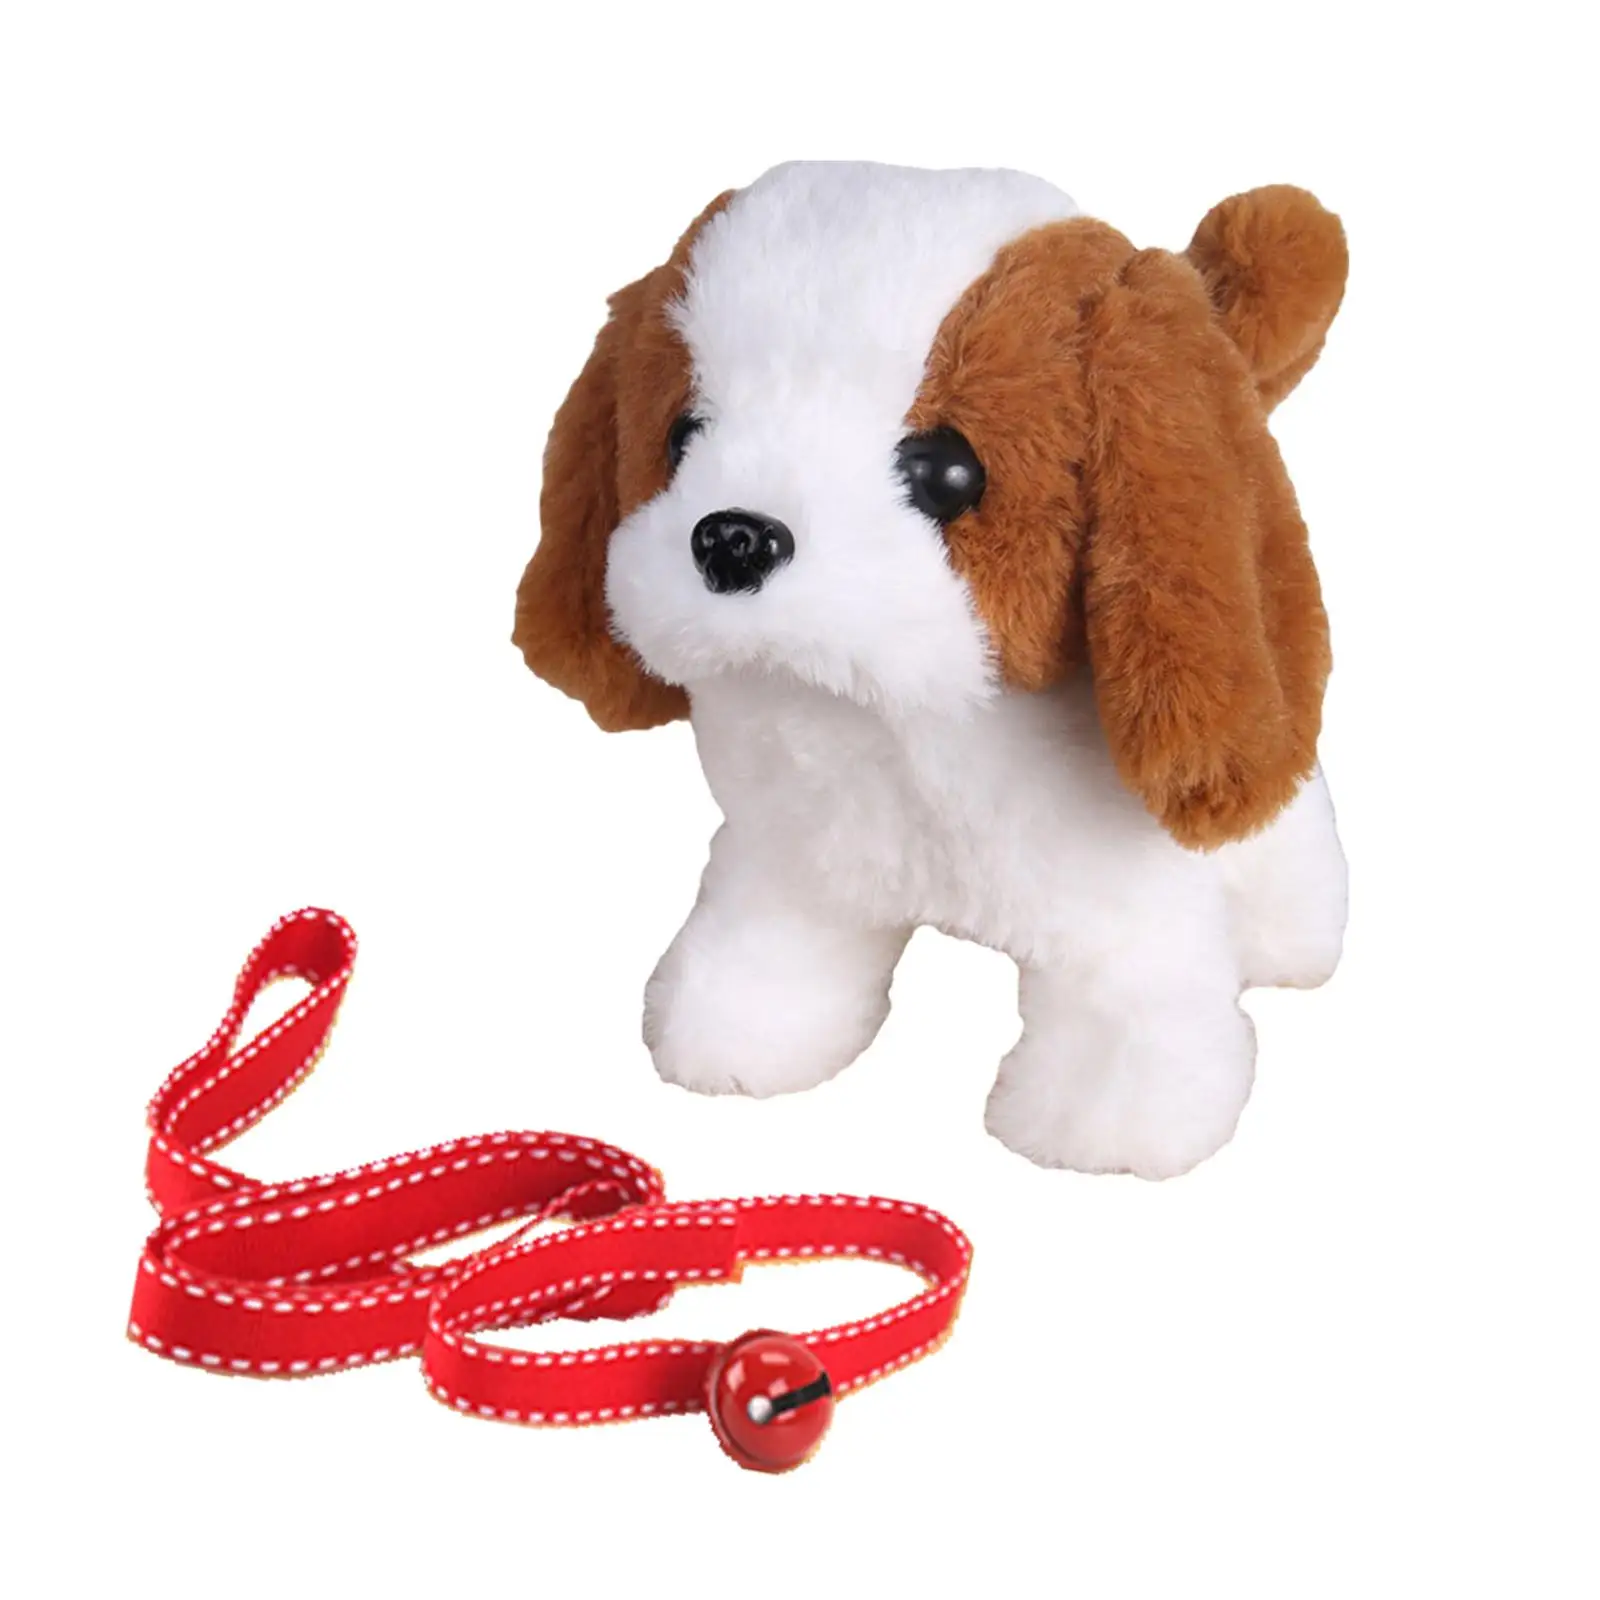 Electronic Pet Plush Dog Barking Tail Wagging Lifelike Funny Interactive Toy Animal for Children Toddlers Gift Stuffed Animals